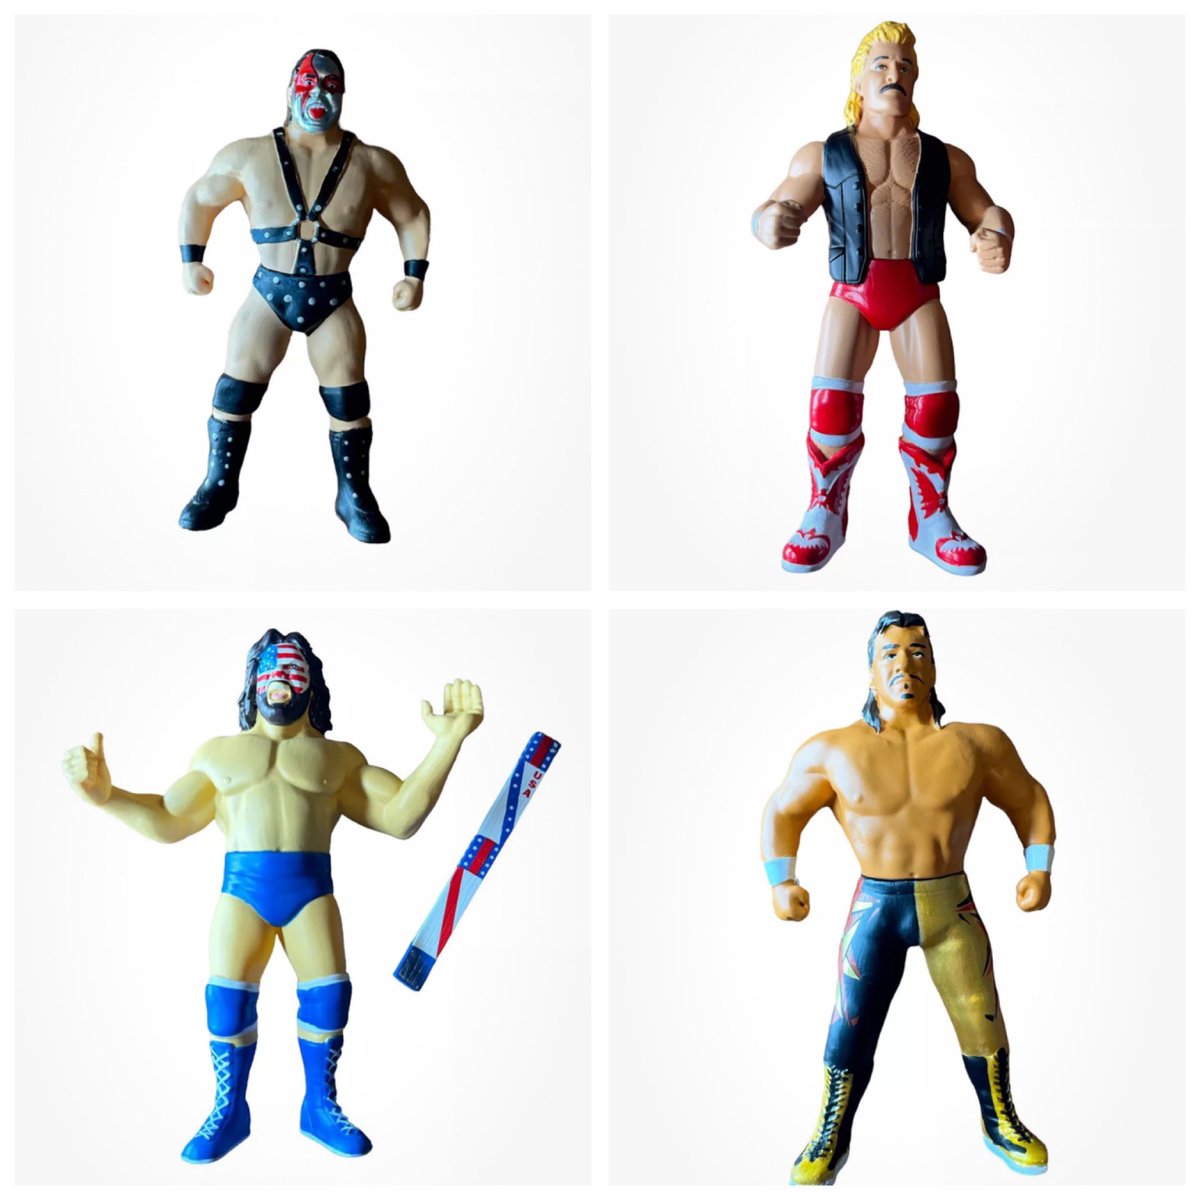 If you don’t have ebay.com/usr/majorbendi… as a saved seller, we recommend you do that soon because we’ve got a lot coming your way this month!

Several #MajorBendies and #BigRubberGuys are available to bid on in various prototype stages!

#ScratchThatFigureItch